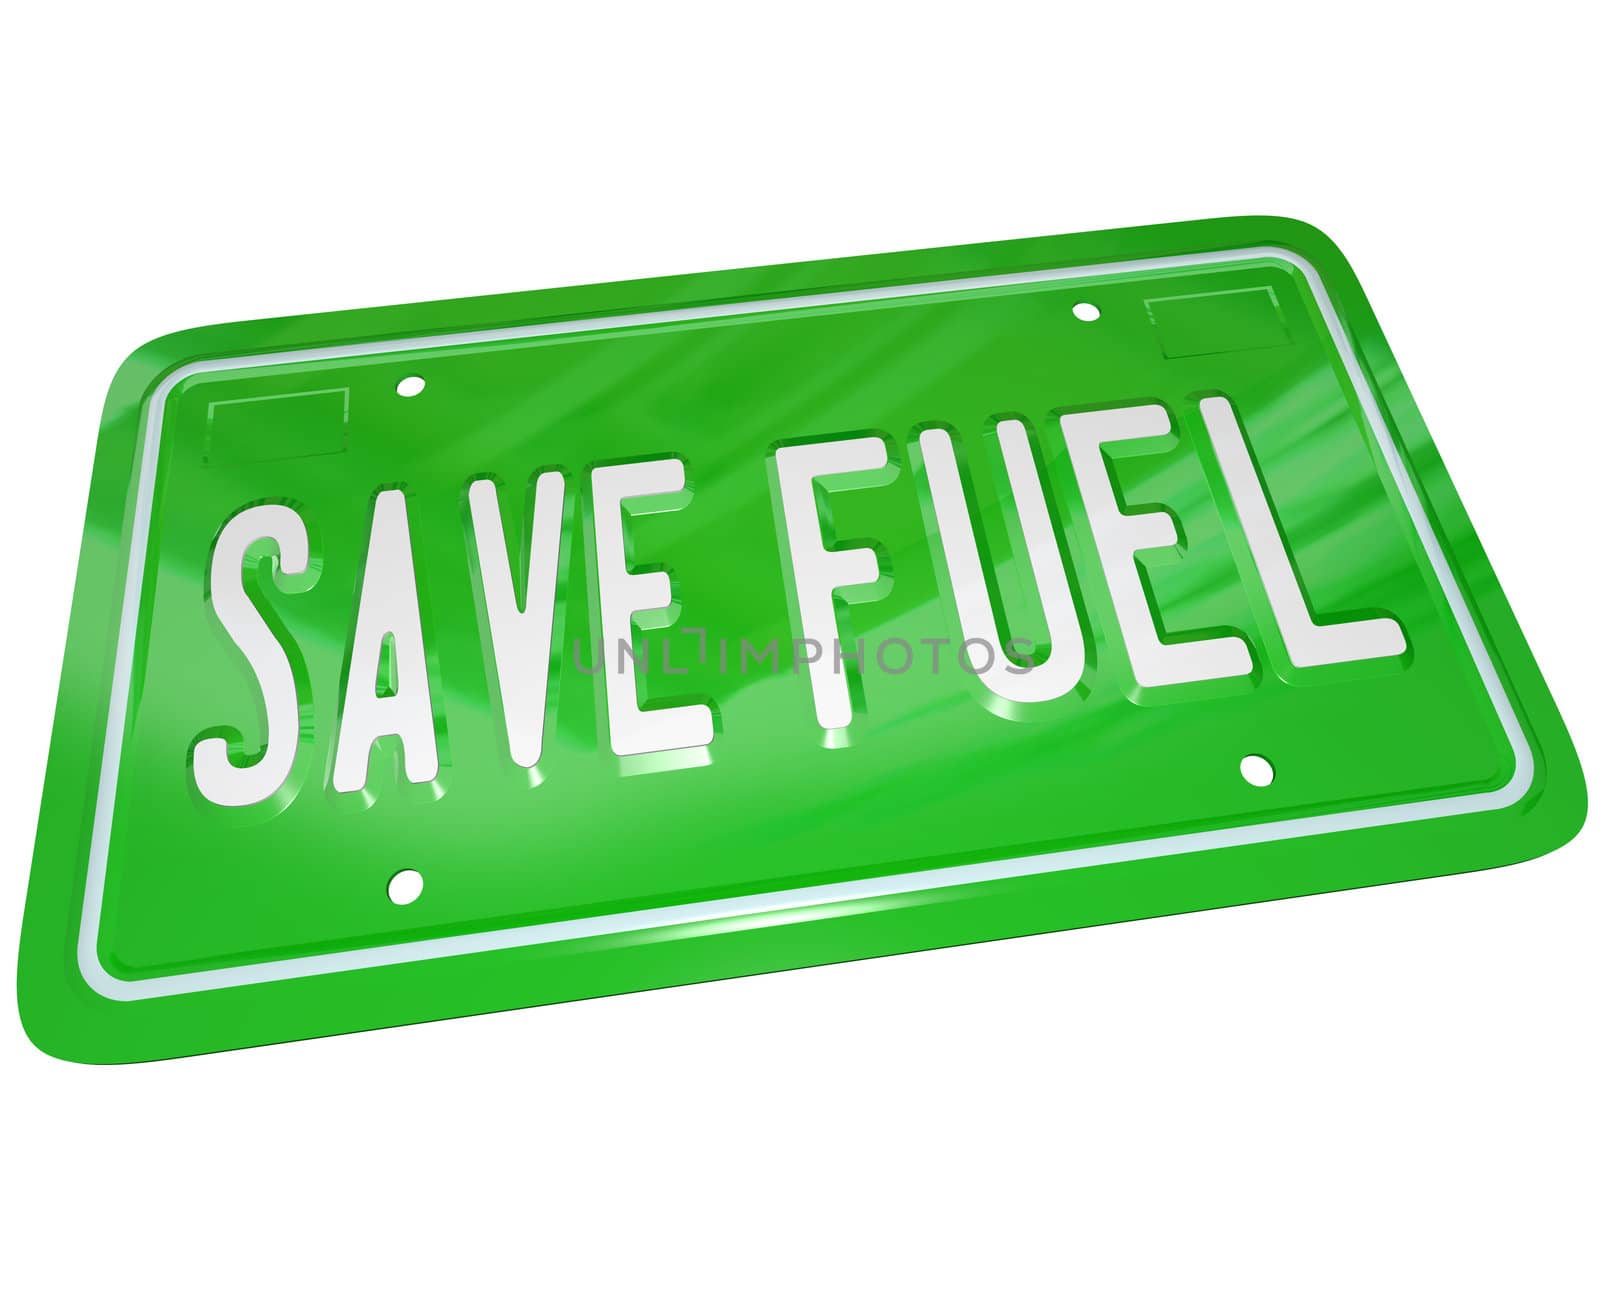 Save Fuel Green License Plate Earth Friendly Power by iQoncept